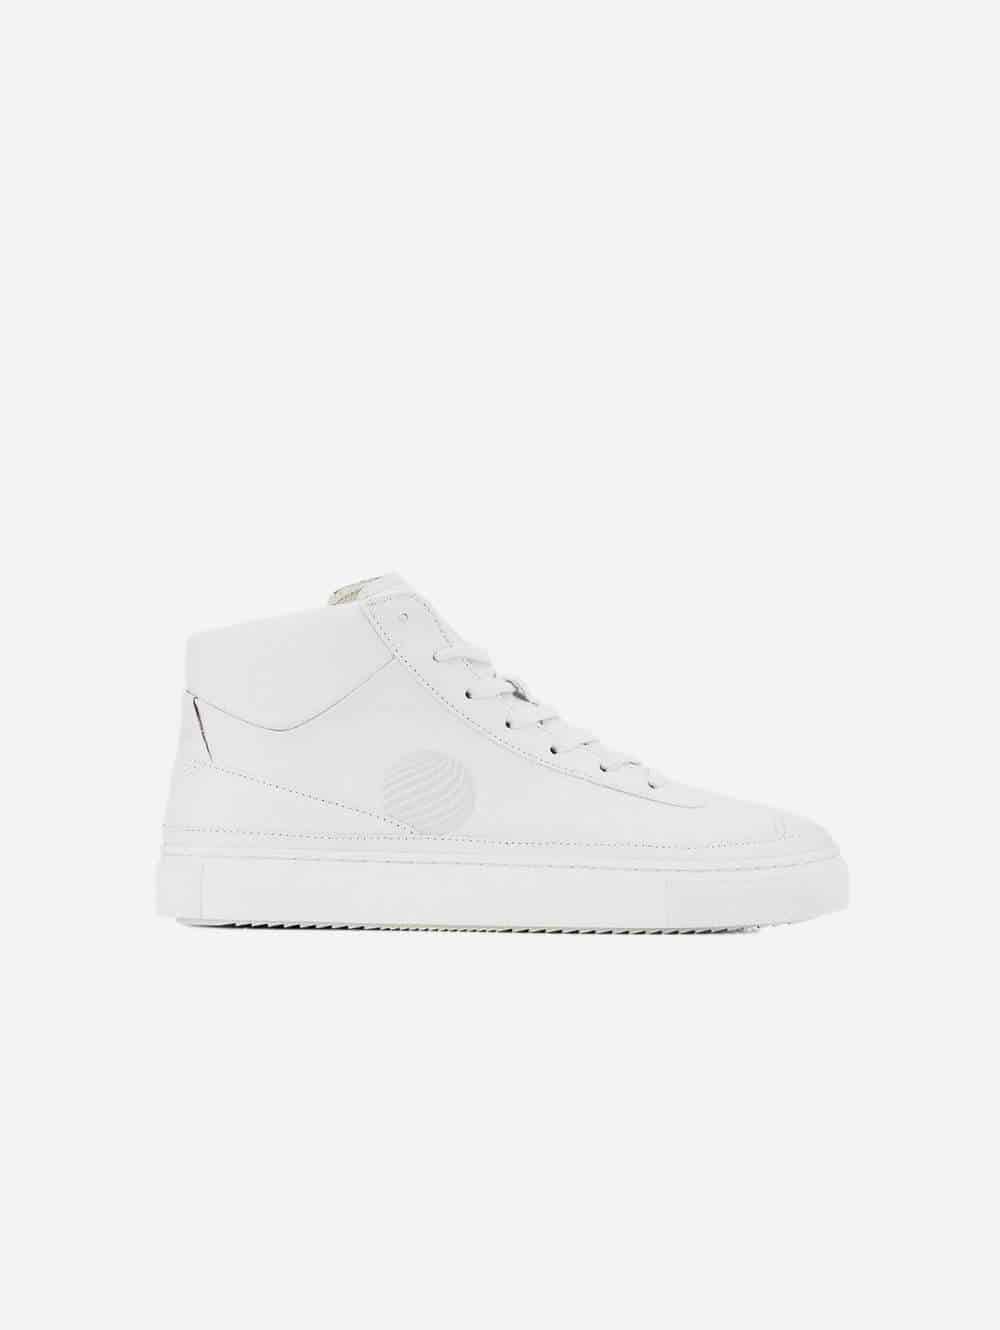 High top white sneakers from Komrads